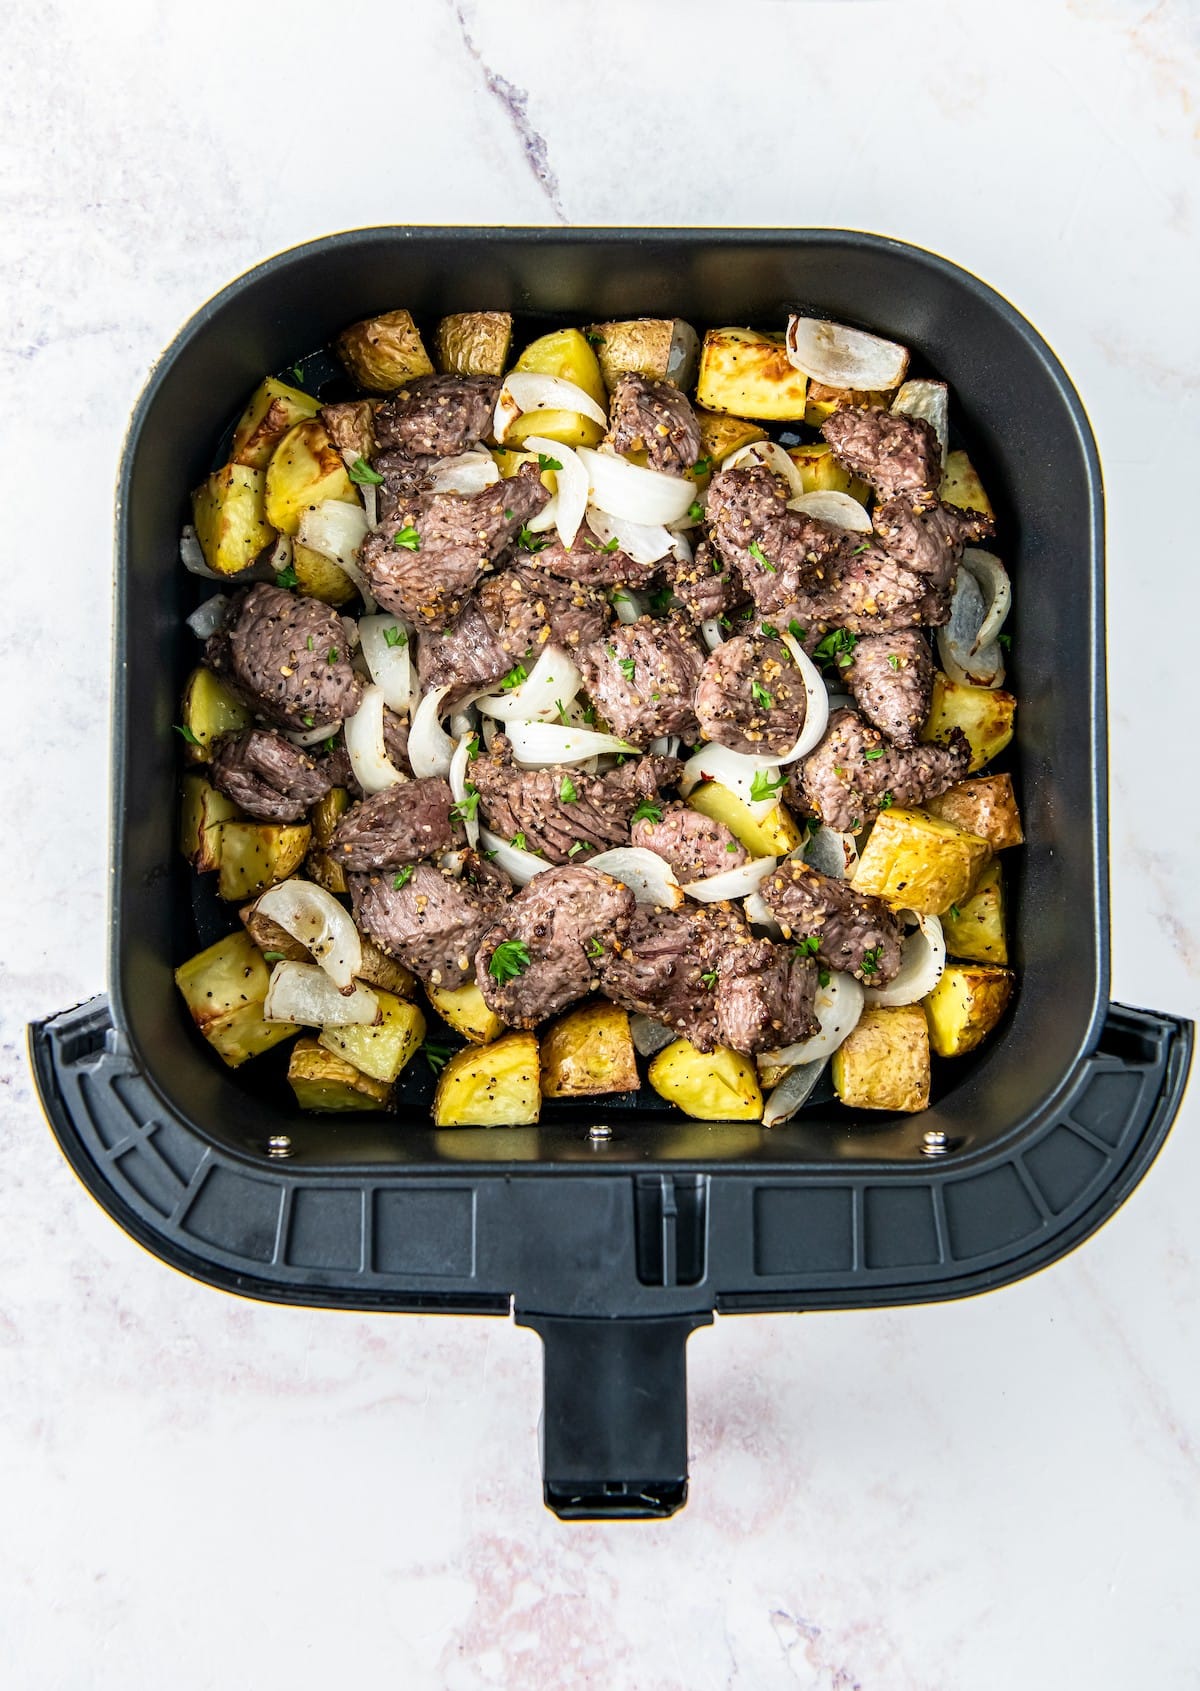 Cooked steak bites, onion, and potatoes in the air fryer.